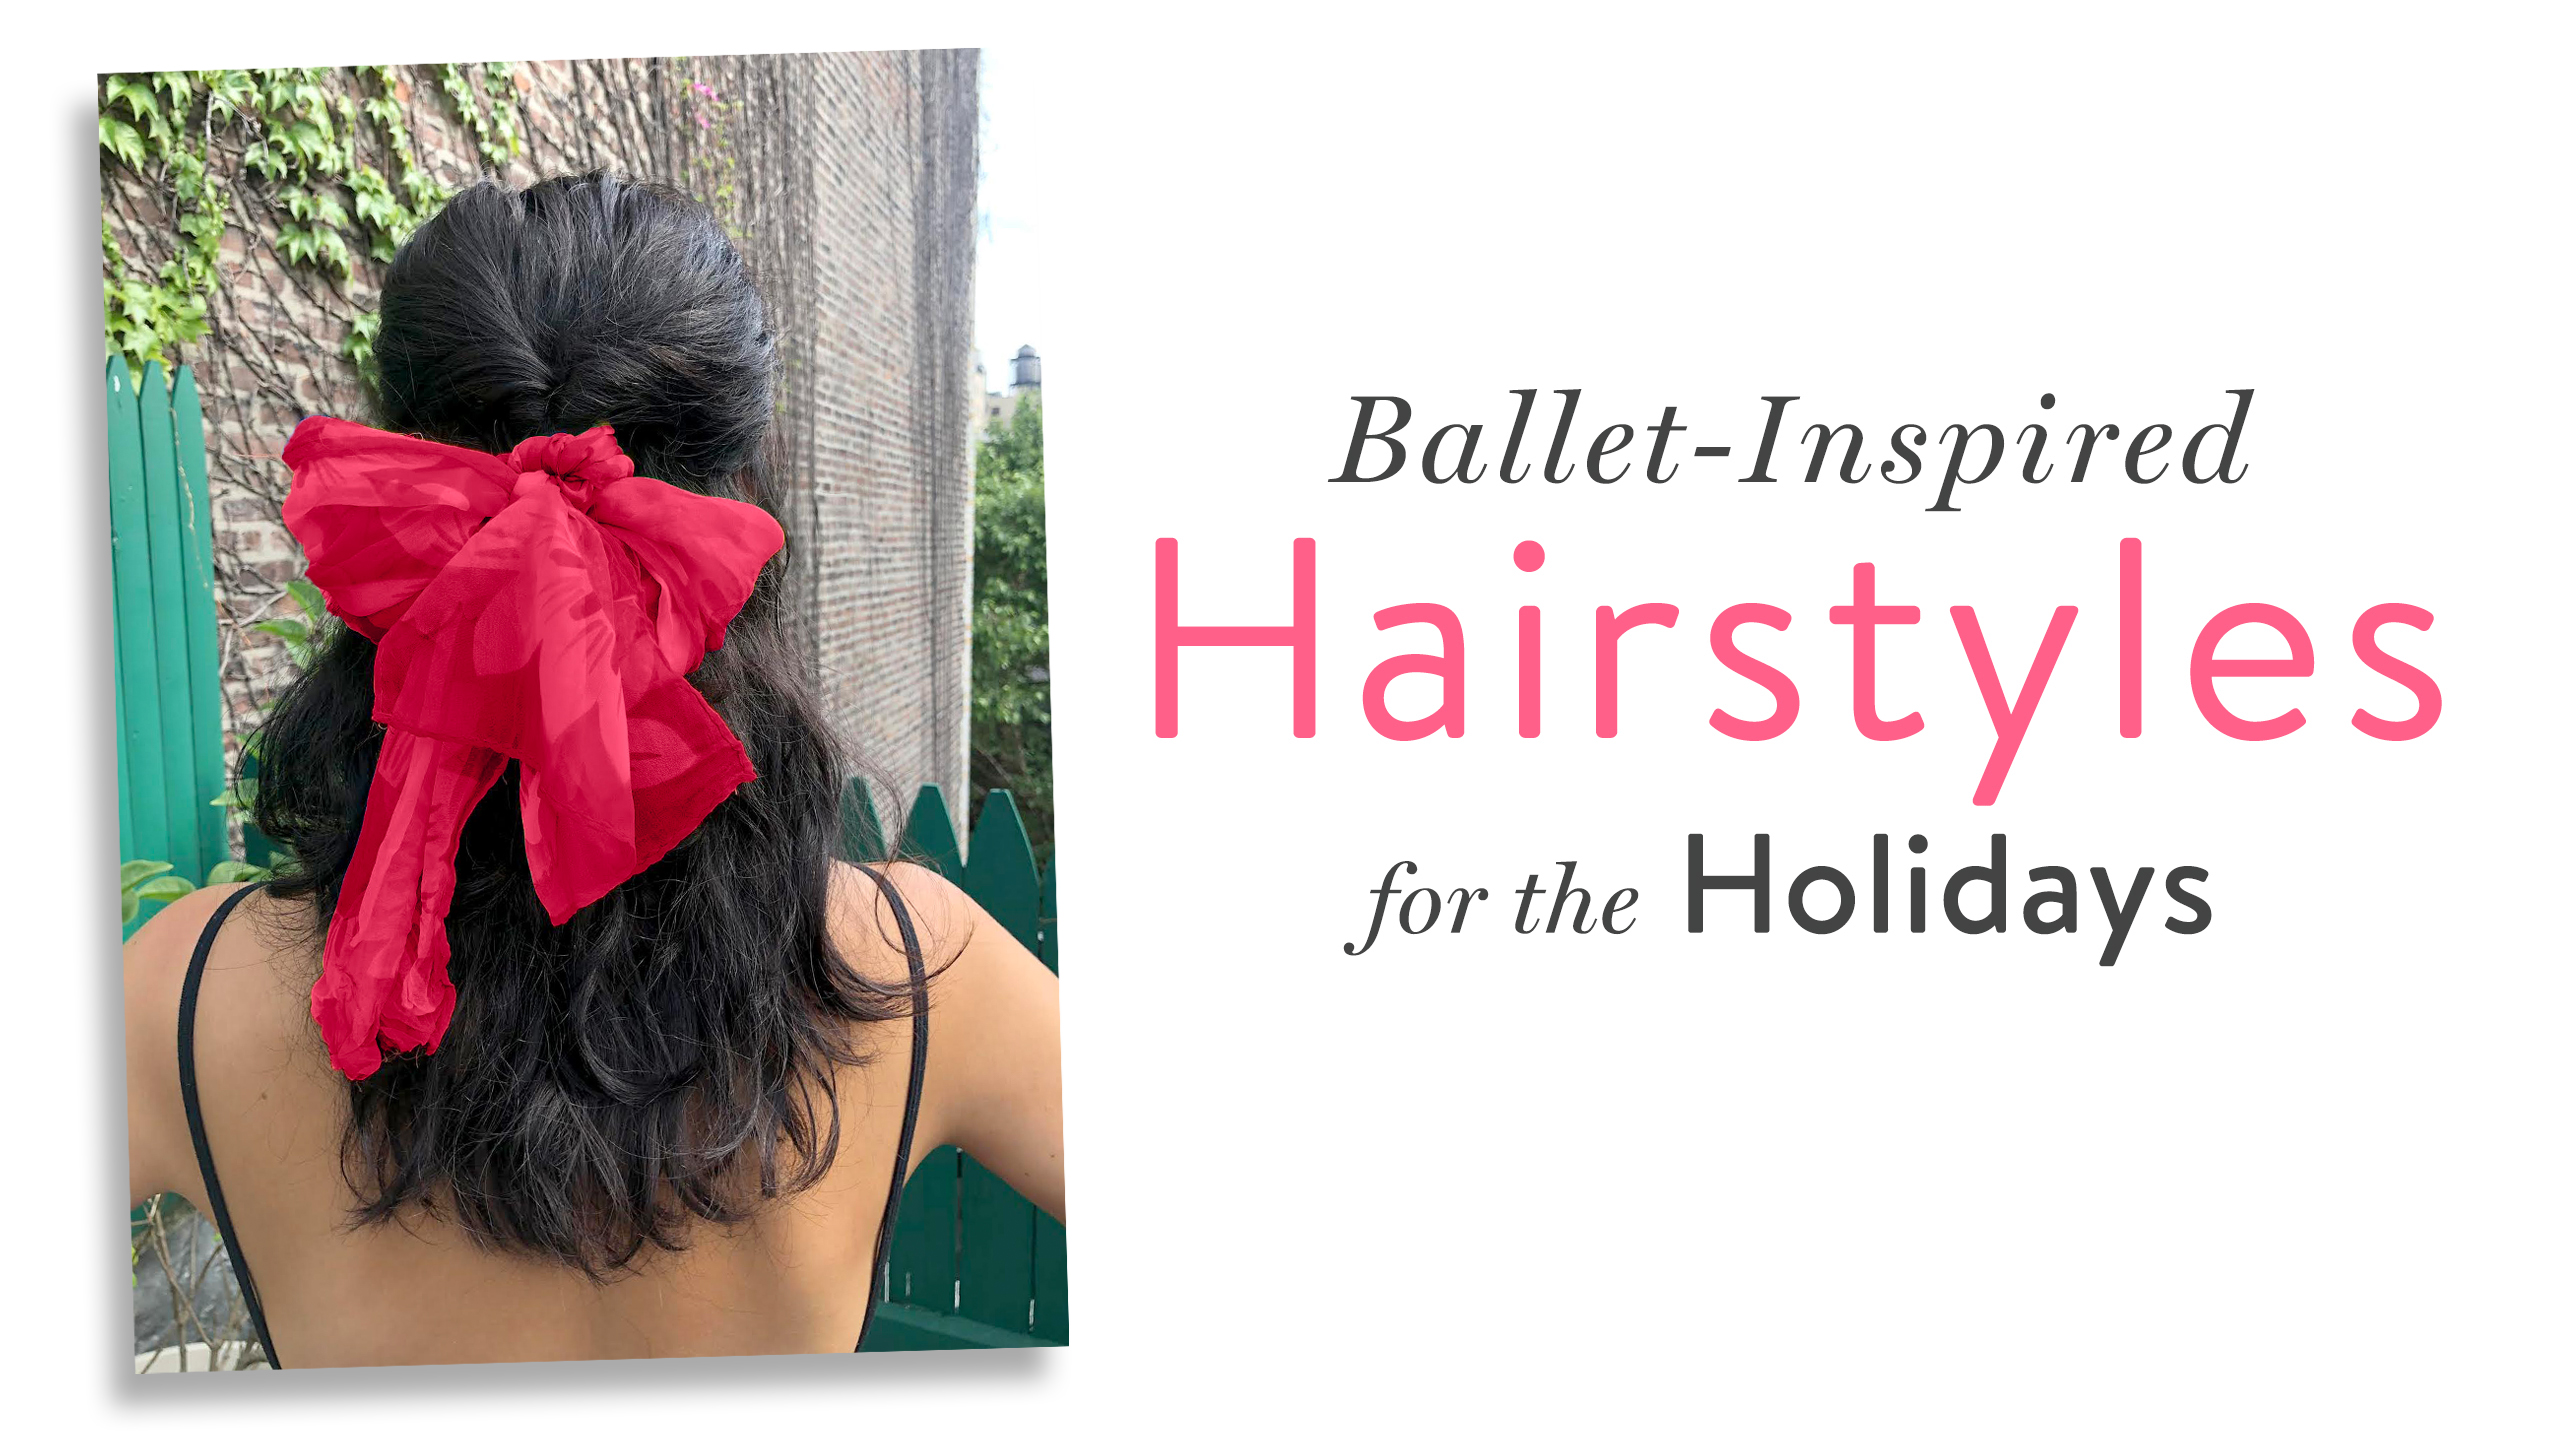 Ballet-Inspired Hairstyles for the Holidays